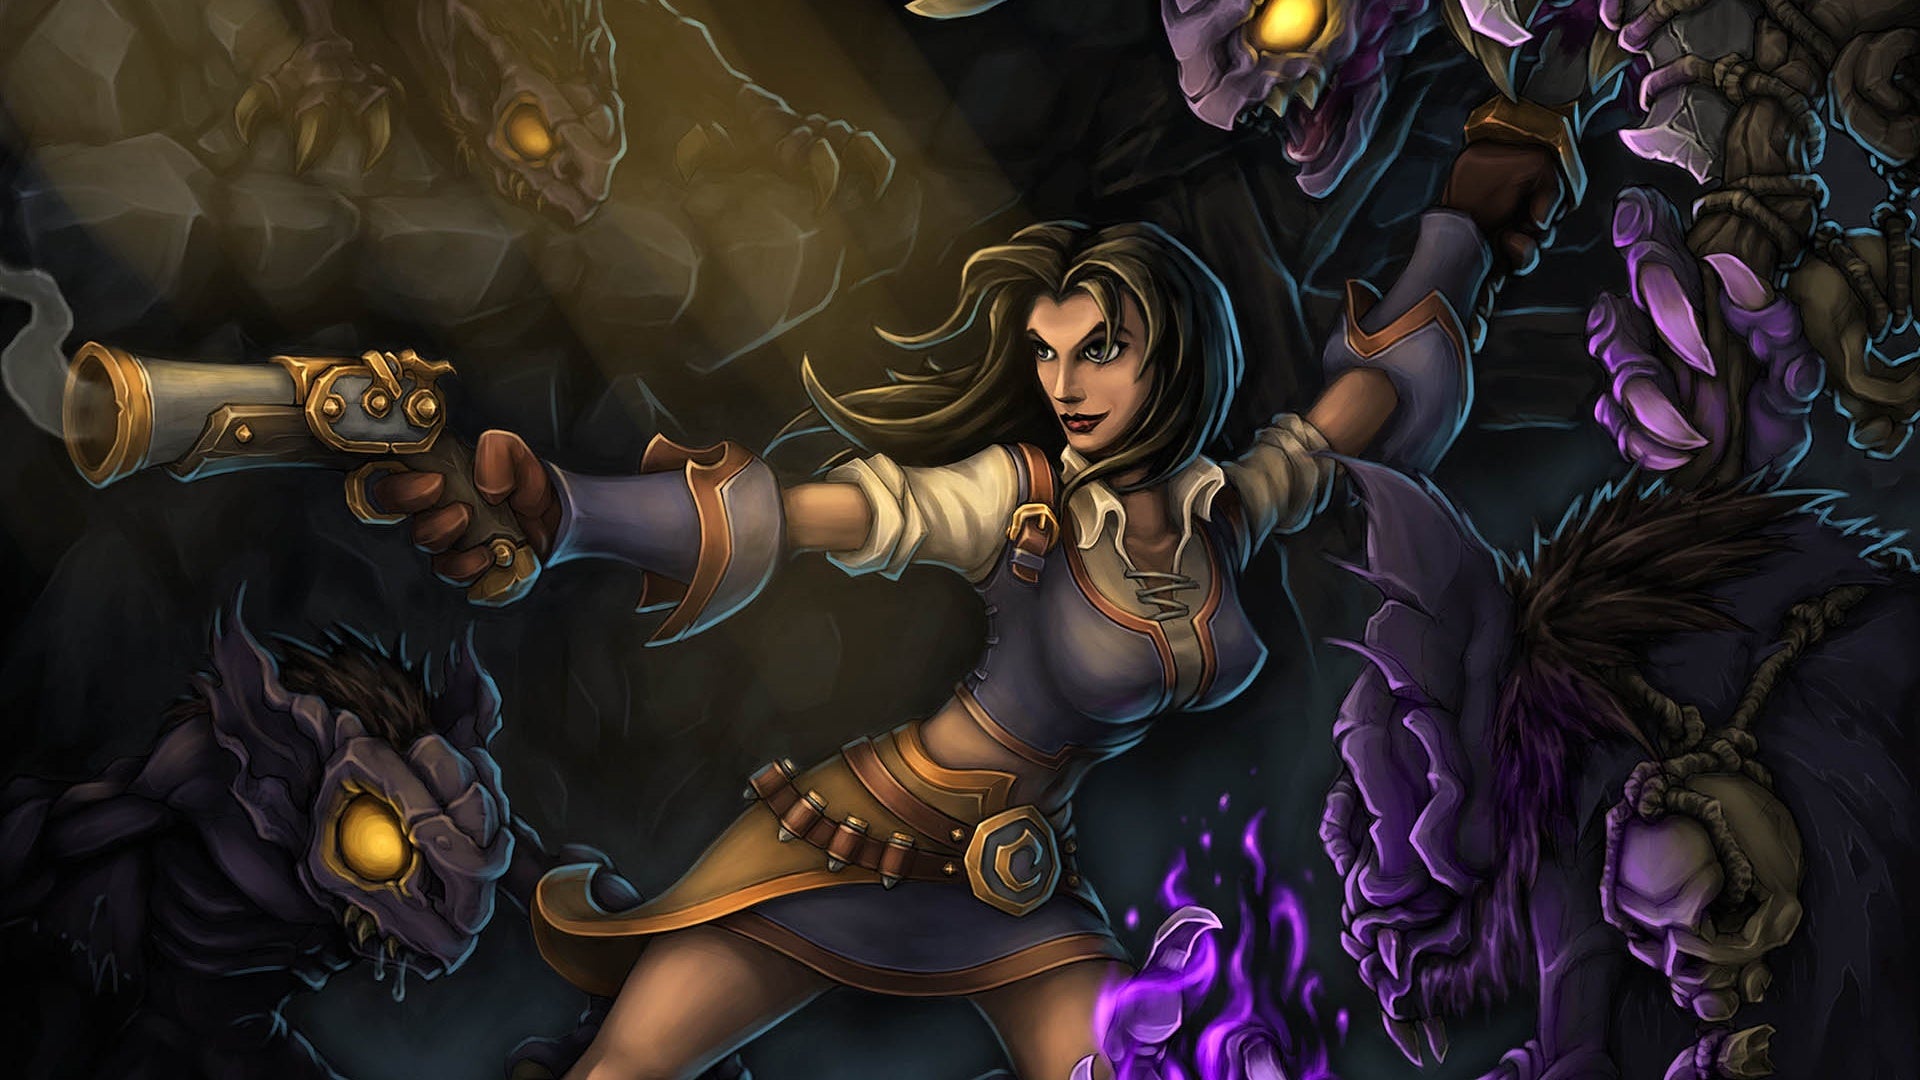 Image for Torchlight studio closed up by Perfect World, but there's "some news coming" on Torchlight series